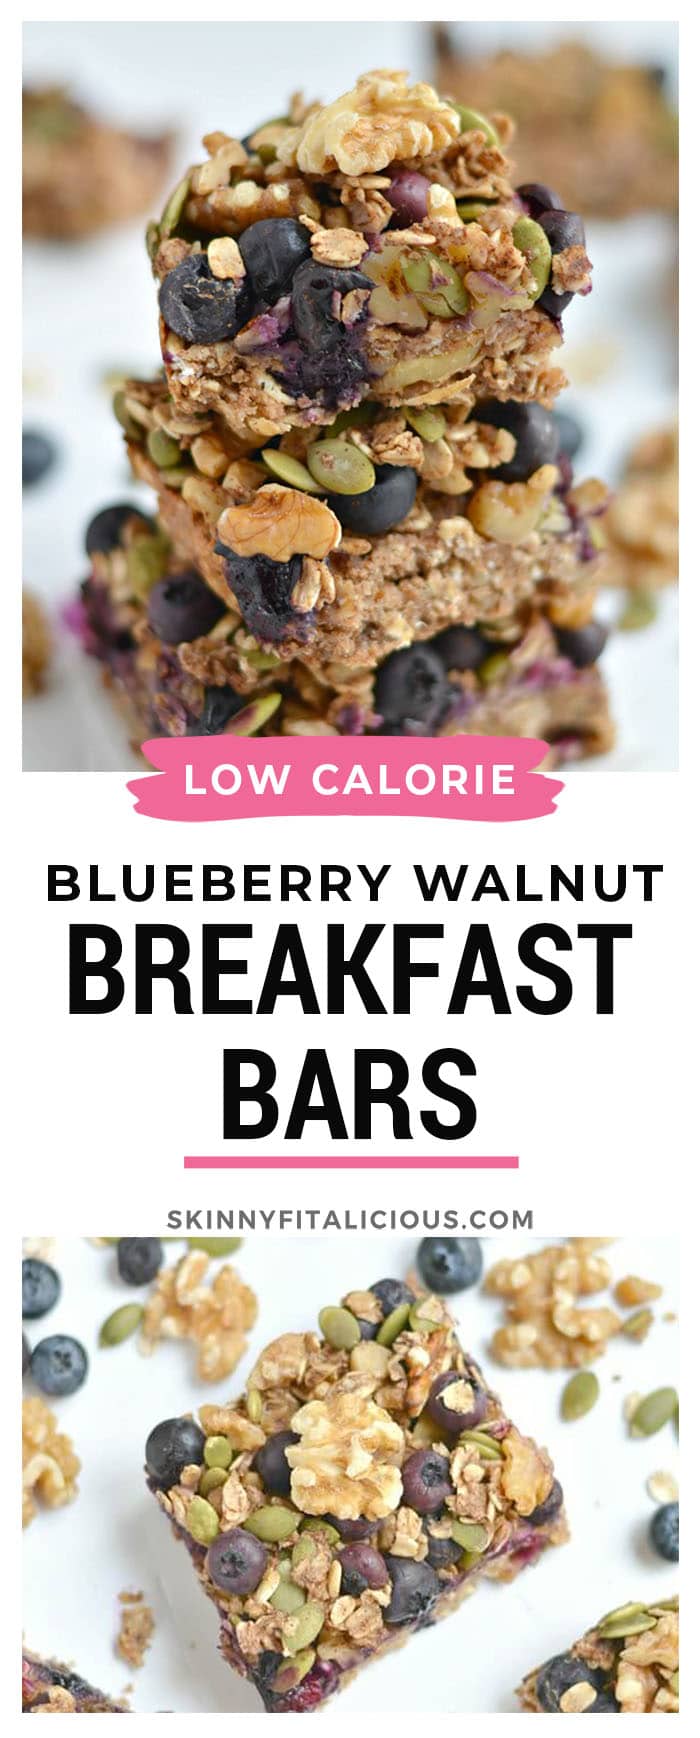 Take your granola bars up a notch with a chewy, oven-baked these Blueberry Protein Walnut Breakfast Bars packed nutrients and antioxidants! Made with a protein-walnut-oat base and topped with a blueberry, walnut and oat crumble this breakfast has everything and more!